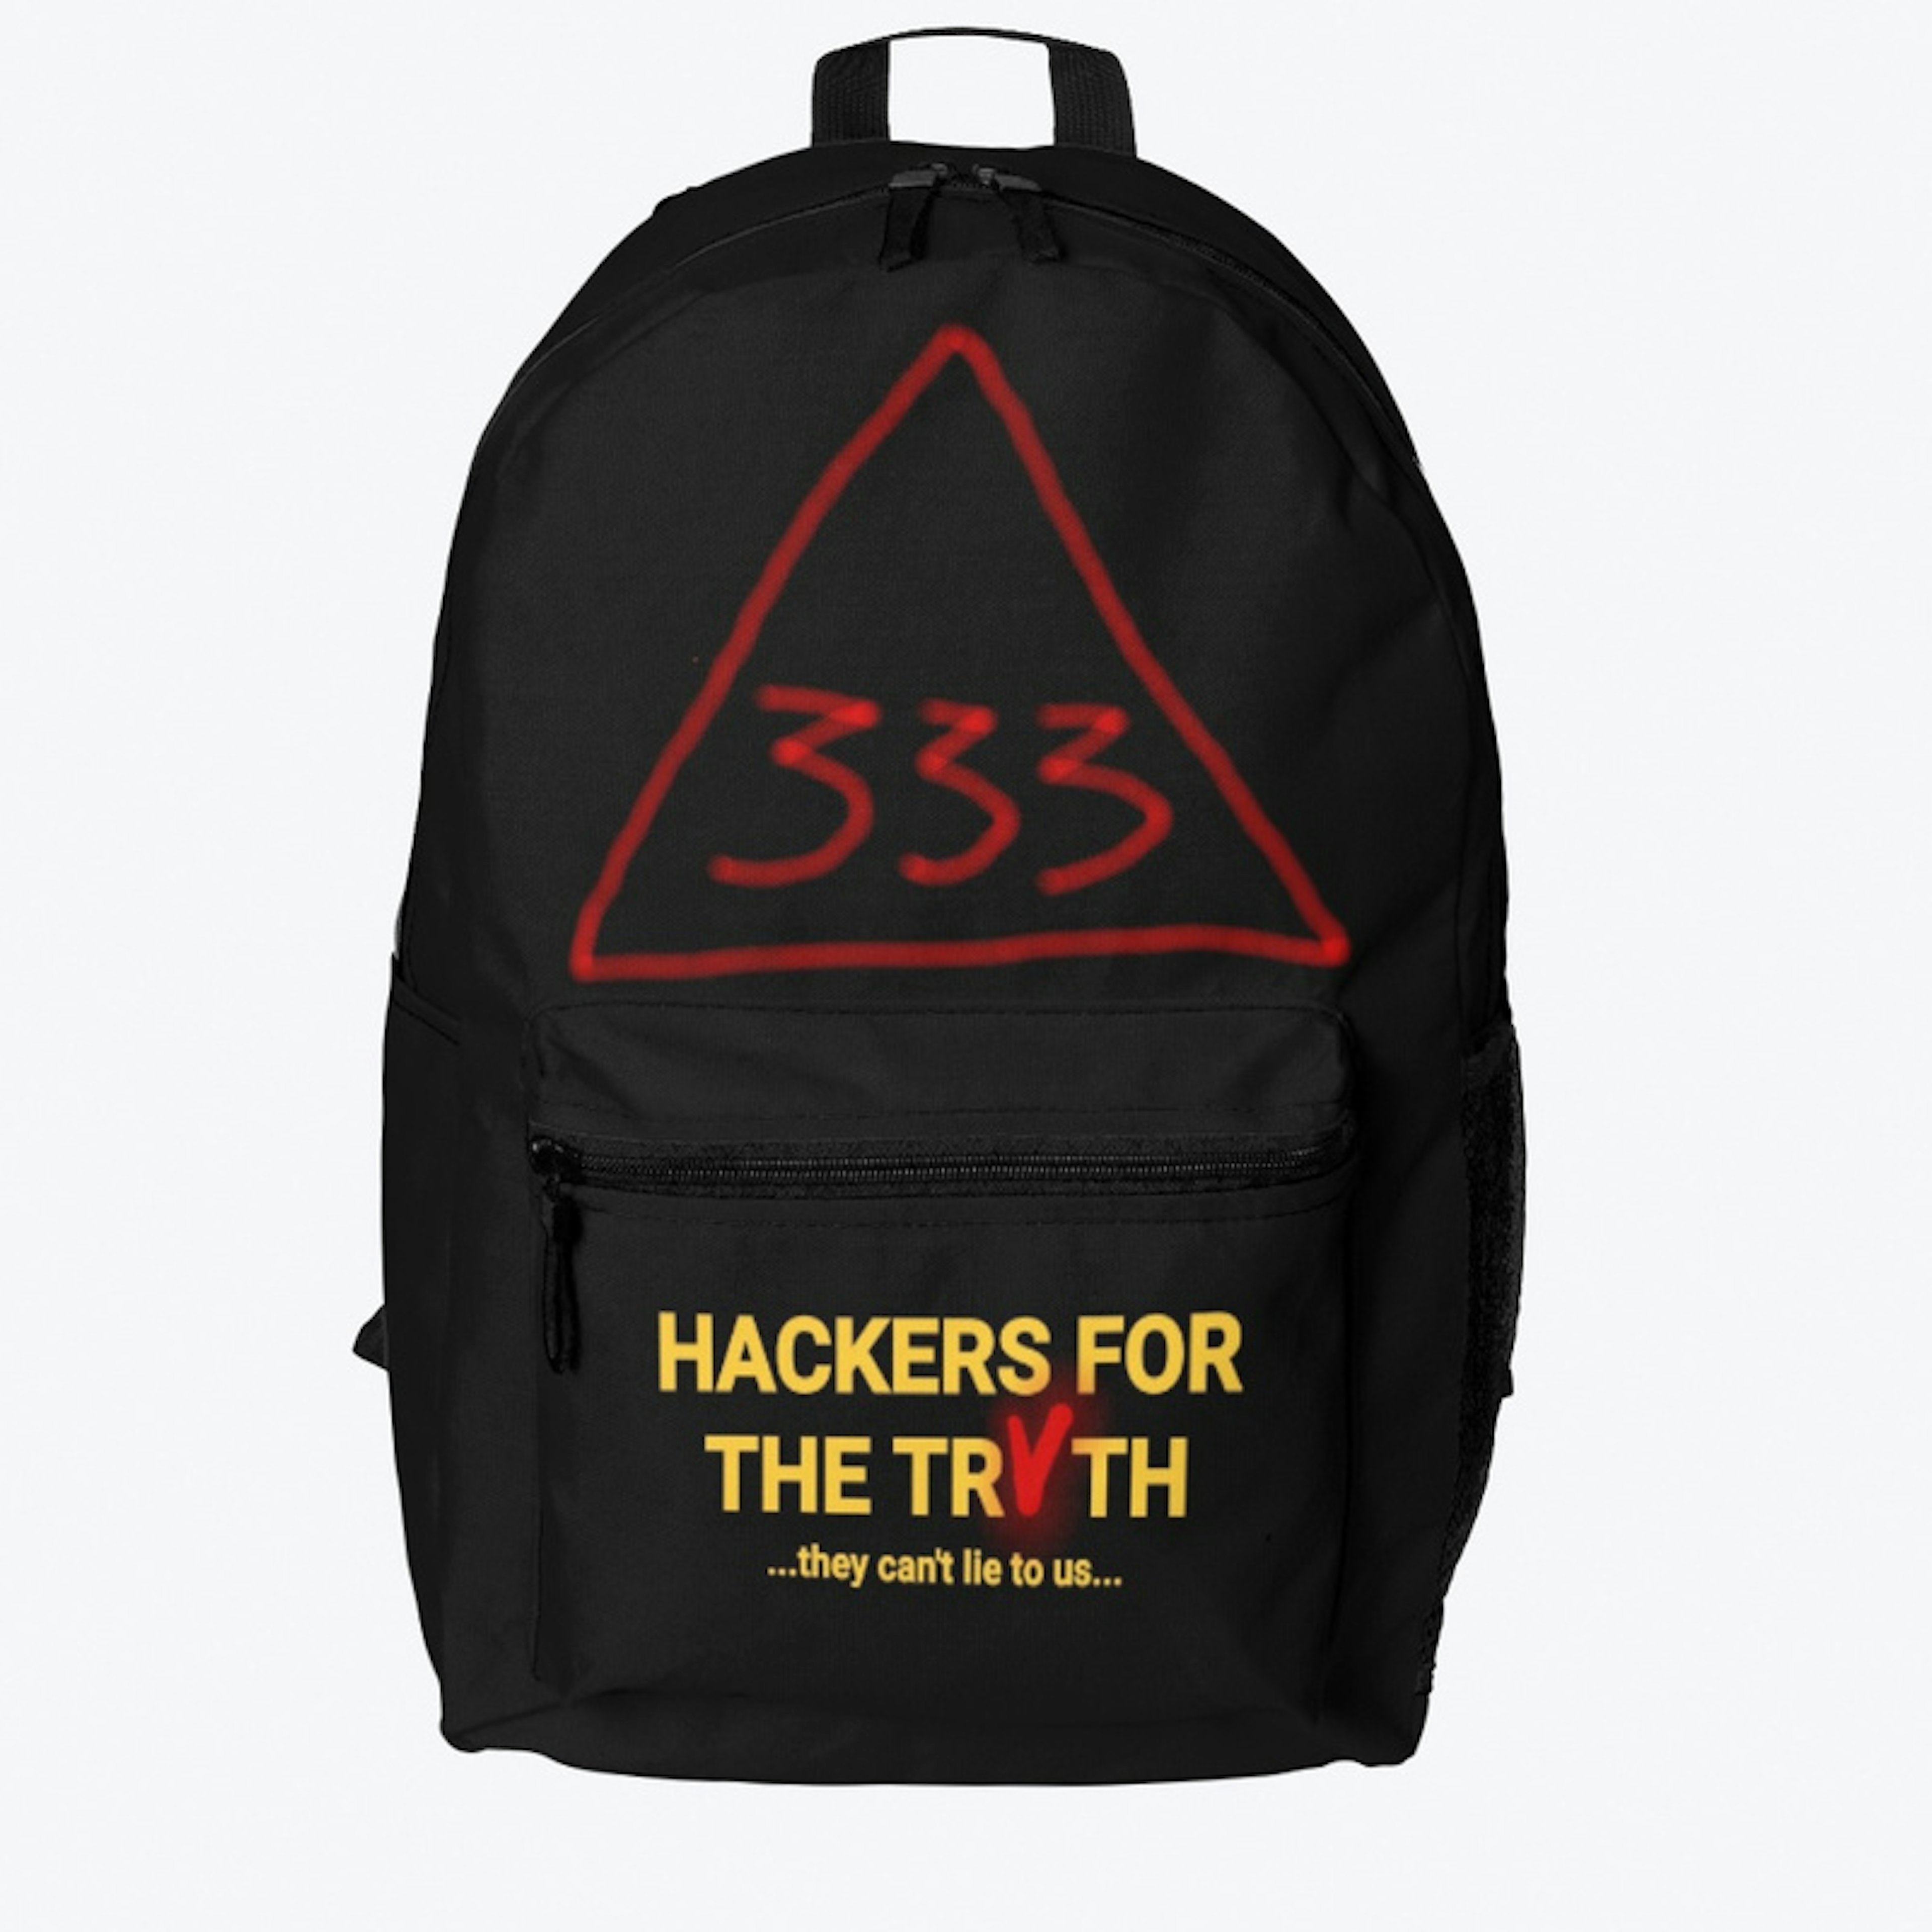 H4ck3r5 for the Truth